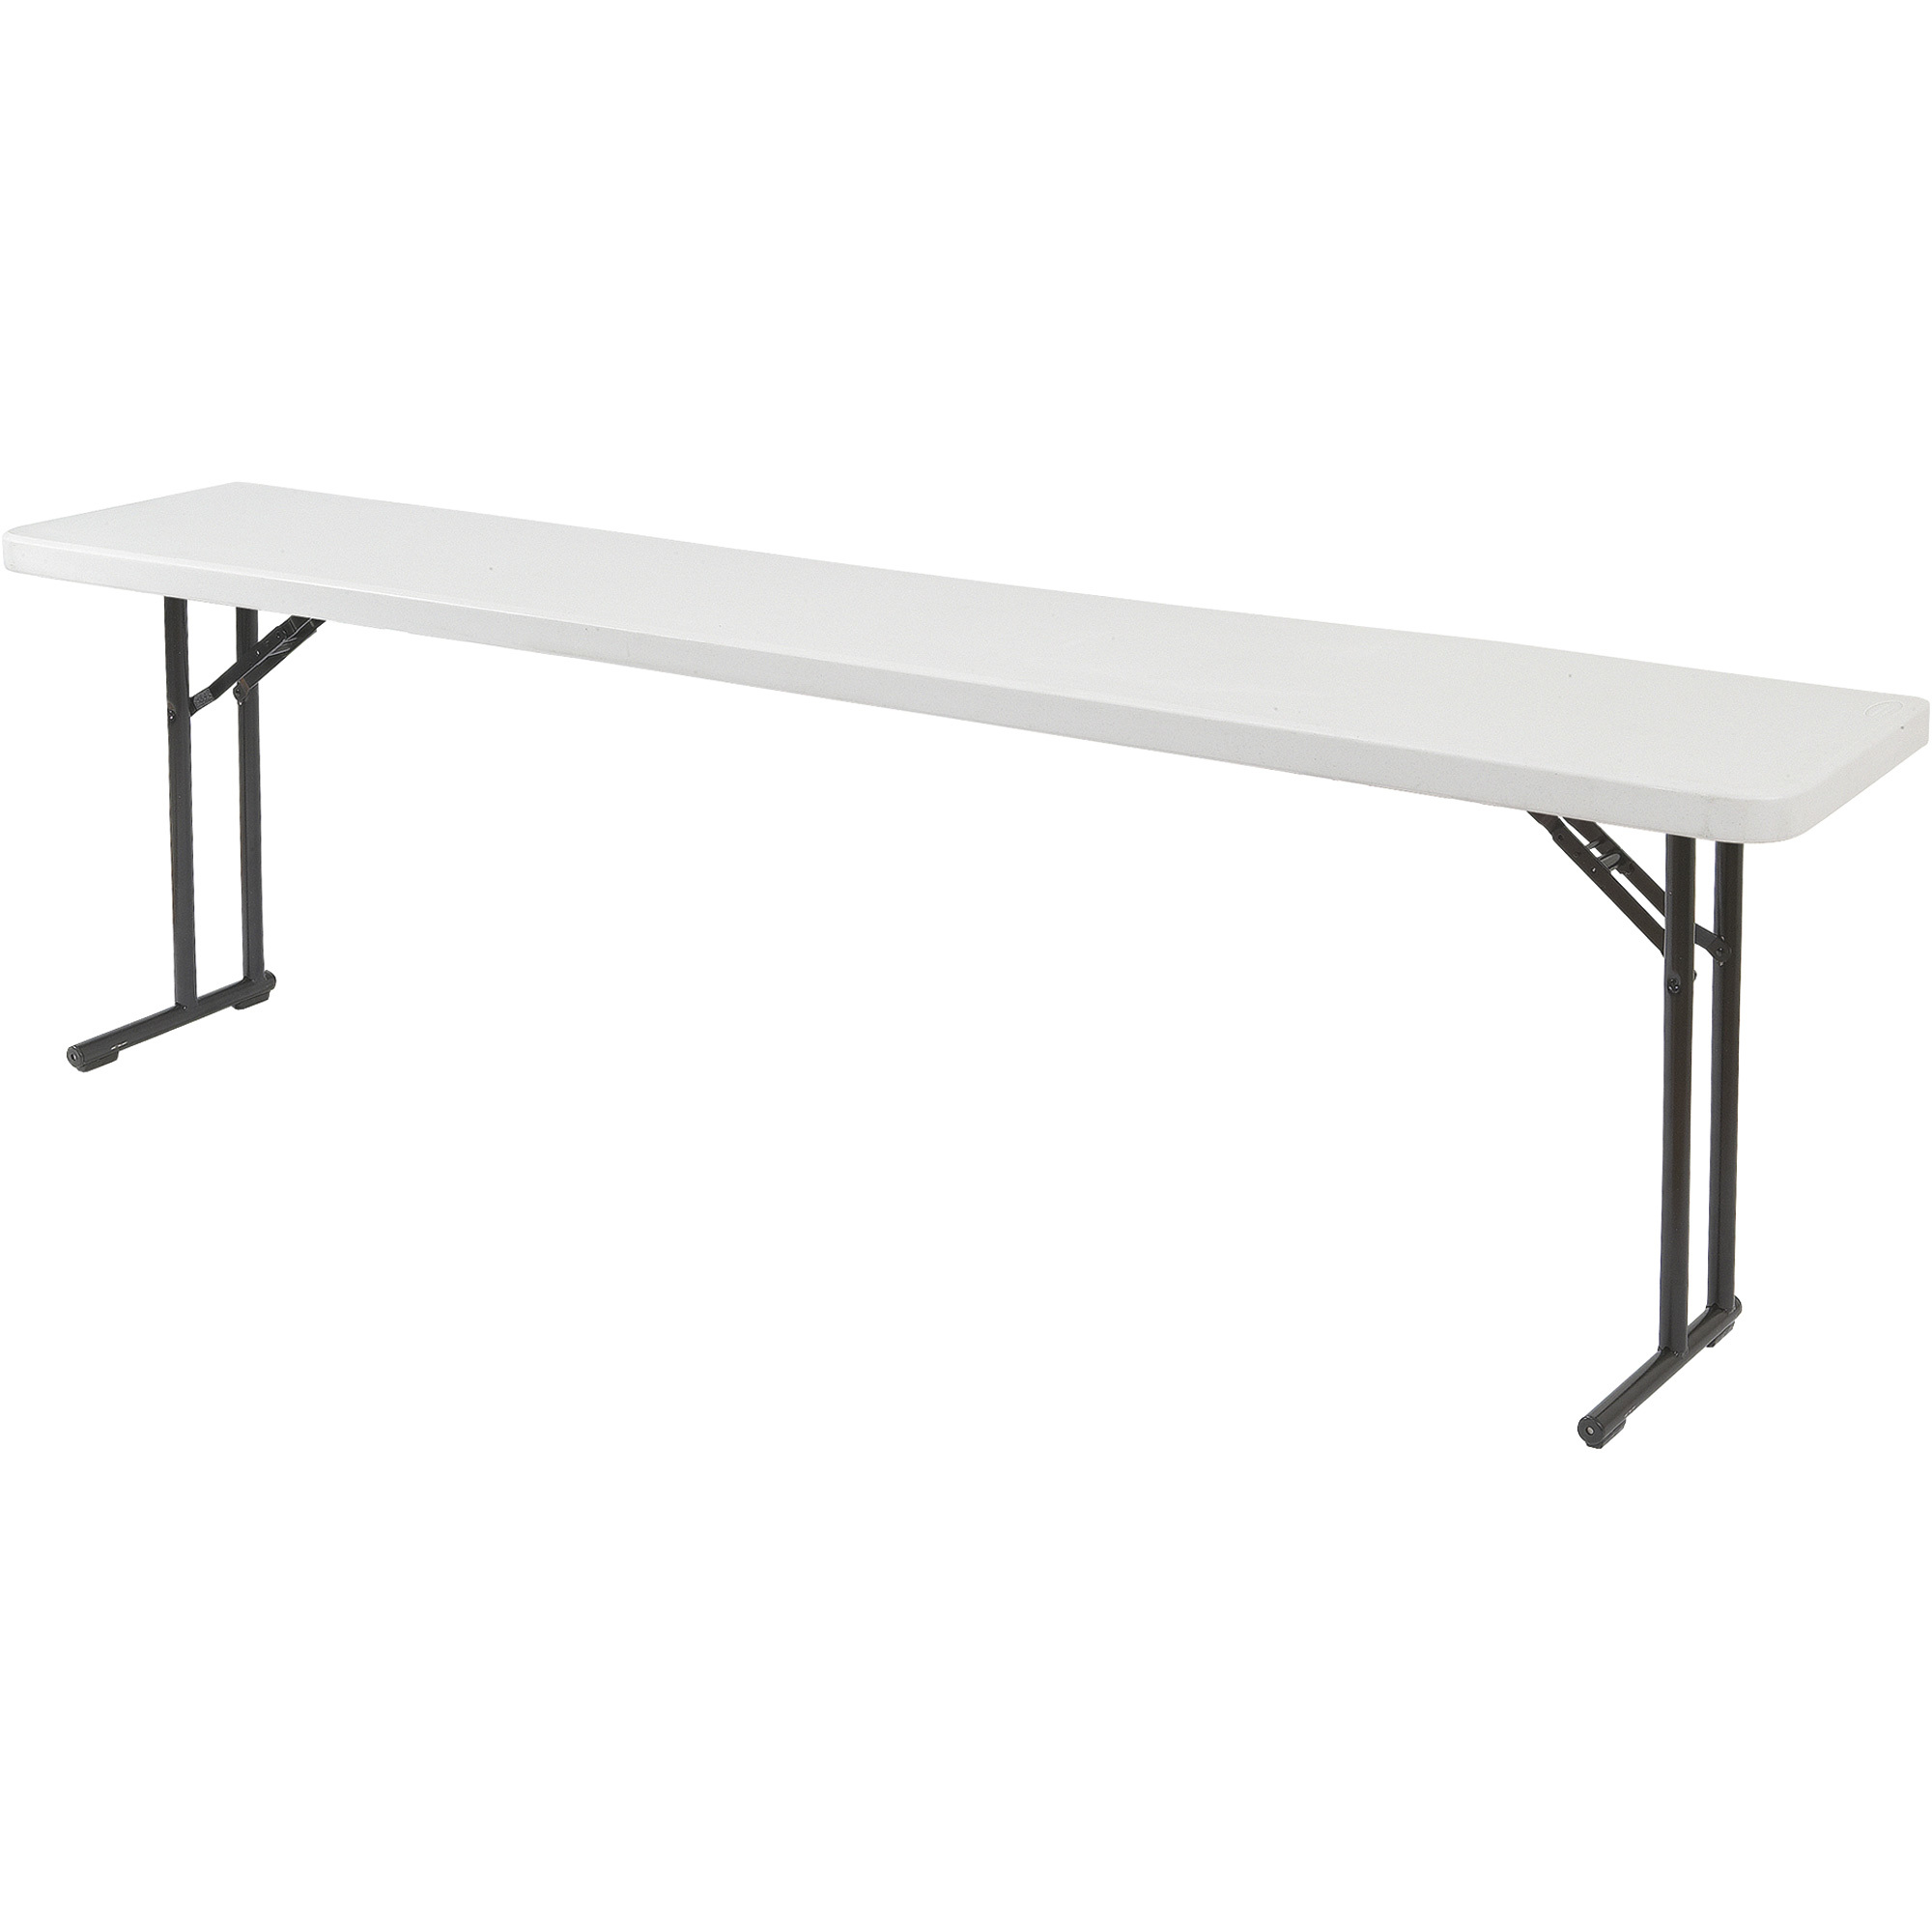 60Inch L x 18Inch W Folding Table — 10-Pack, Gray, Model - National Public Seating BT1860/10